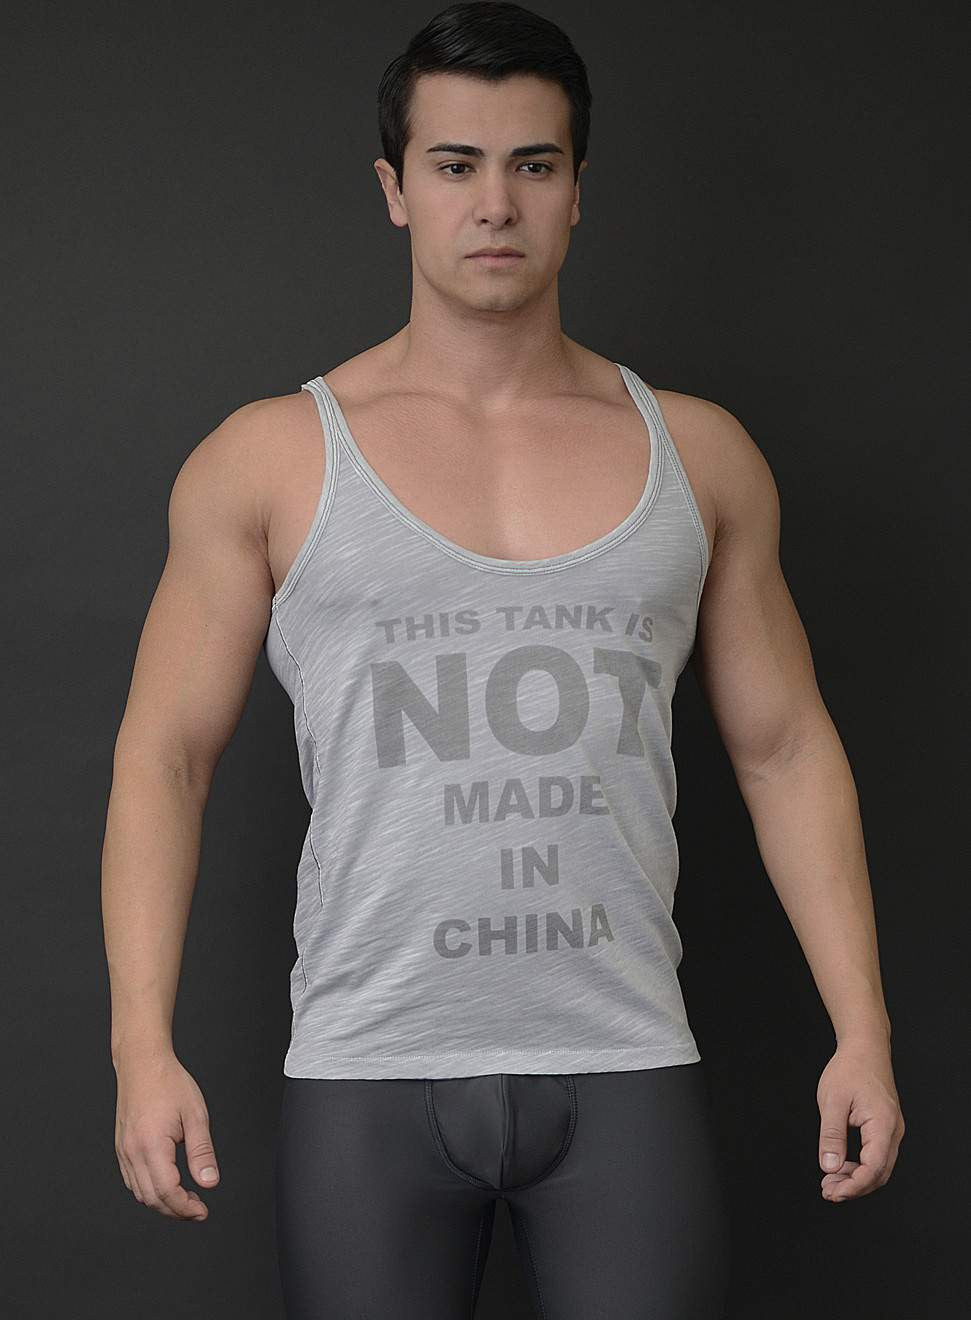 JESSE NOT MADE IN CHINA TANK